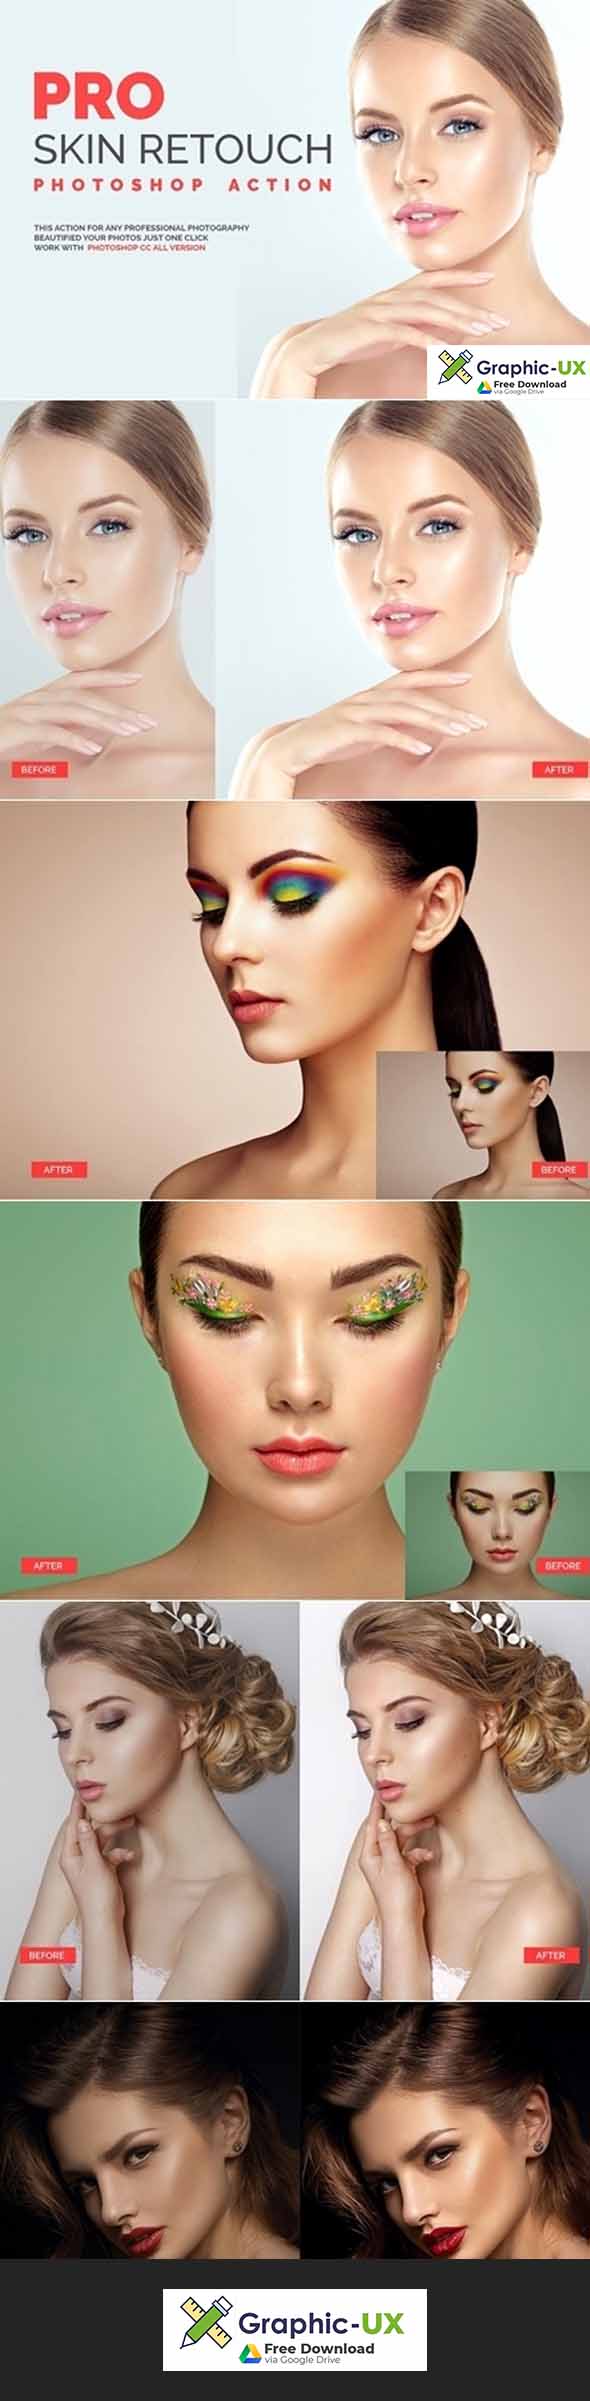 photoshop skin retouching actions free download